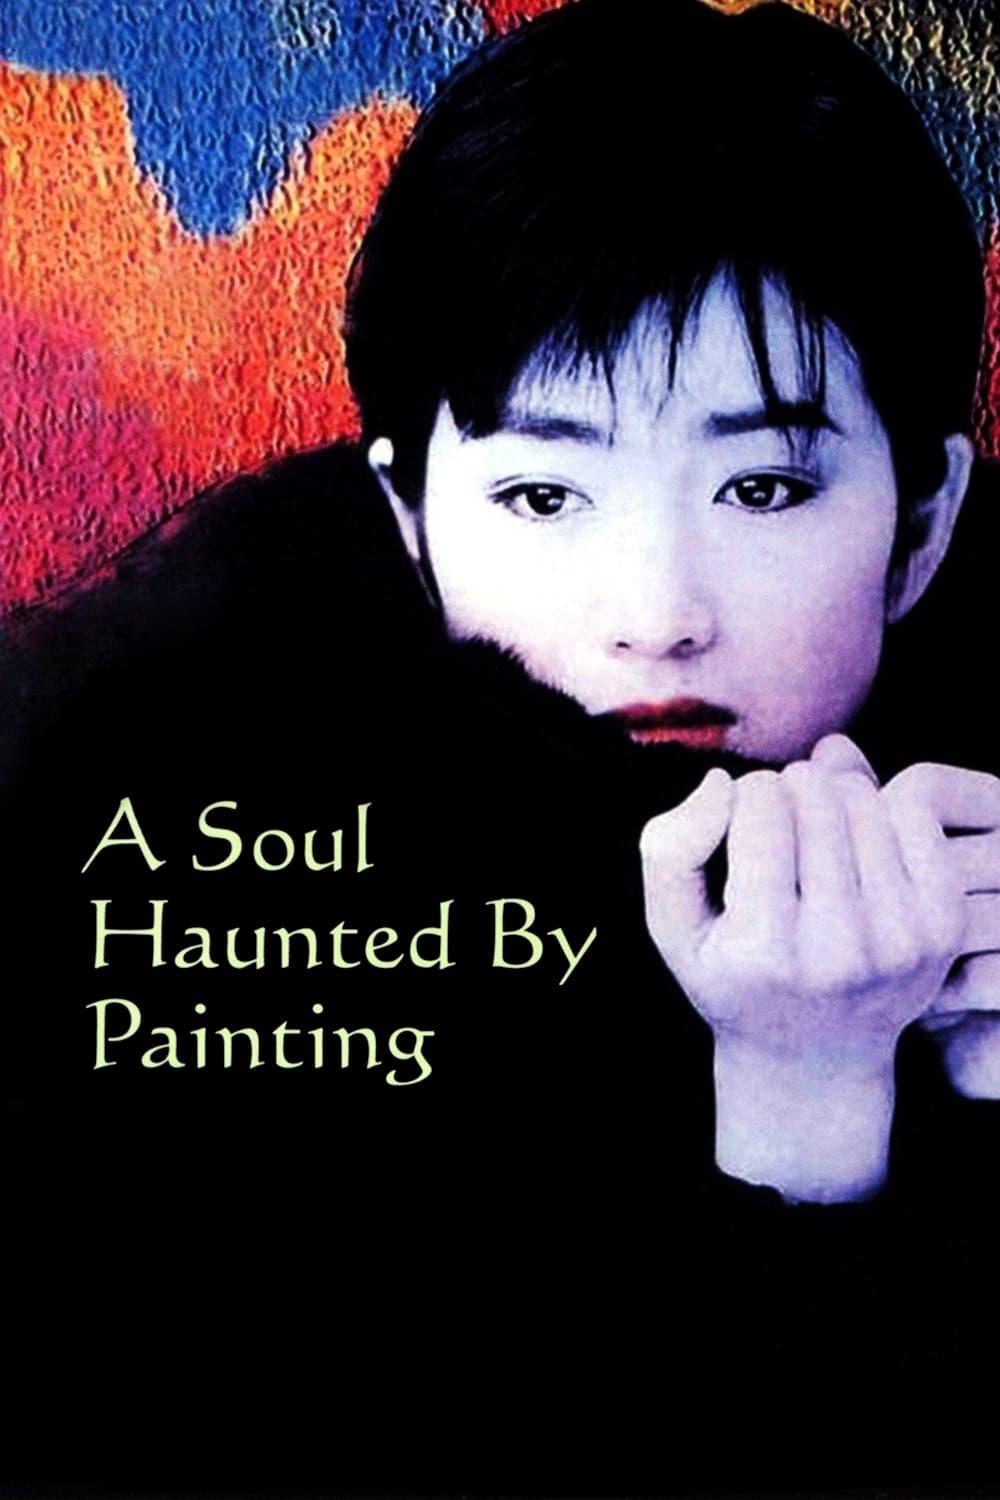 A Soul Haunted by Painting poster